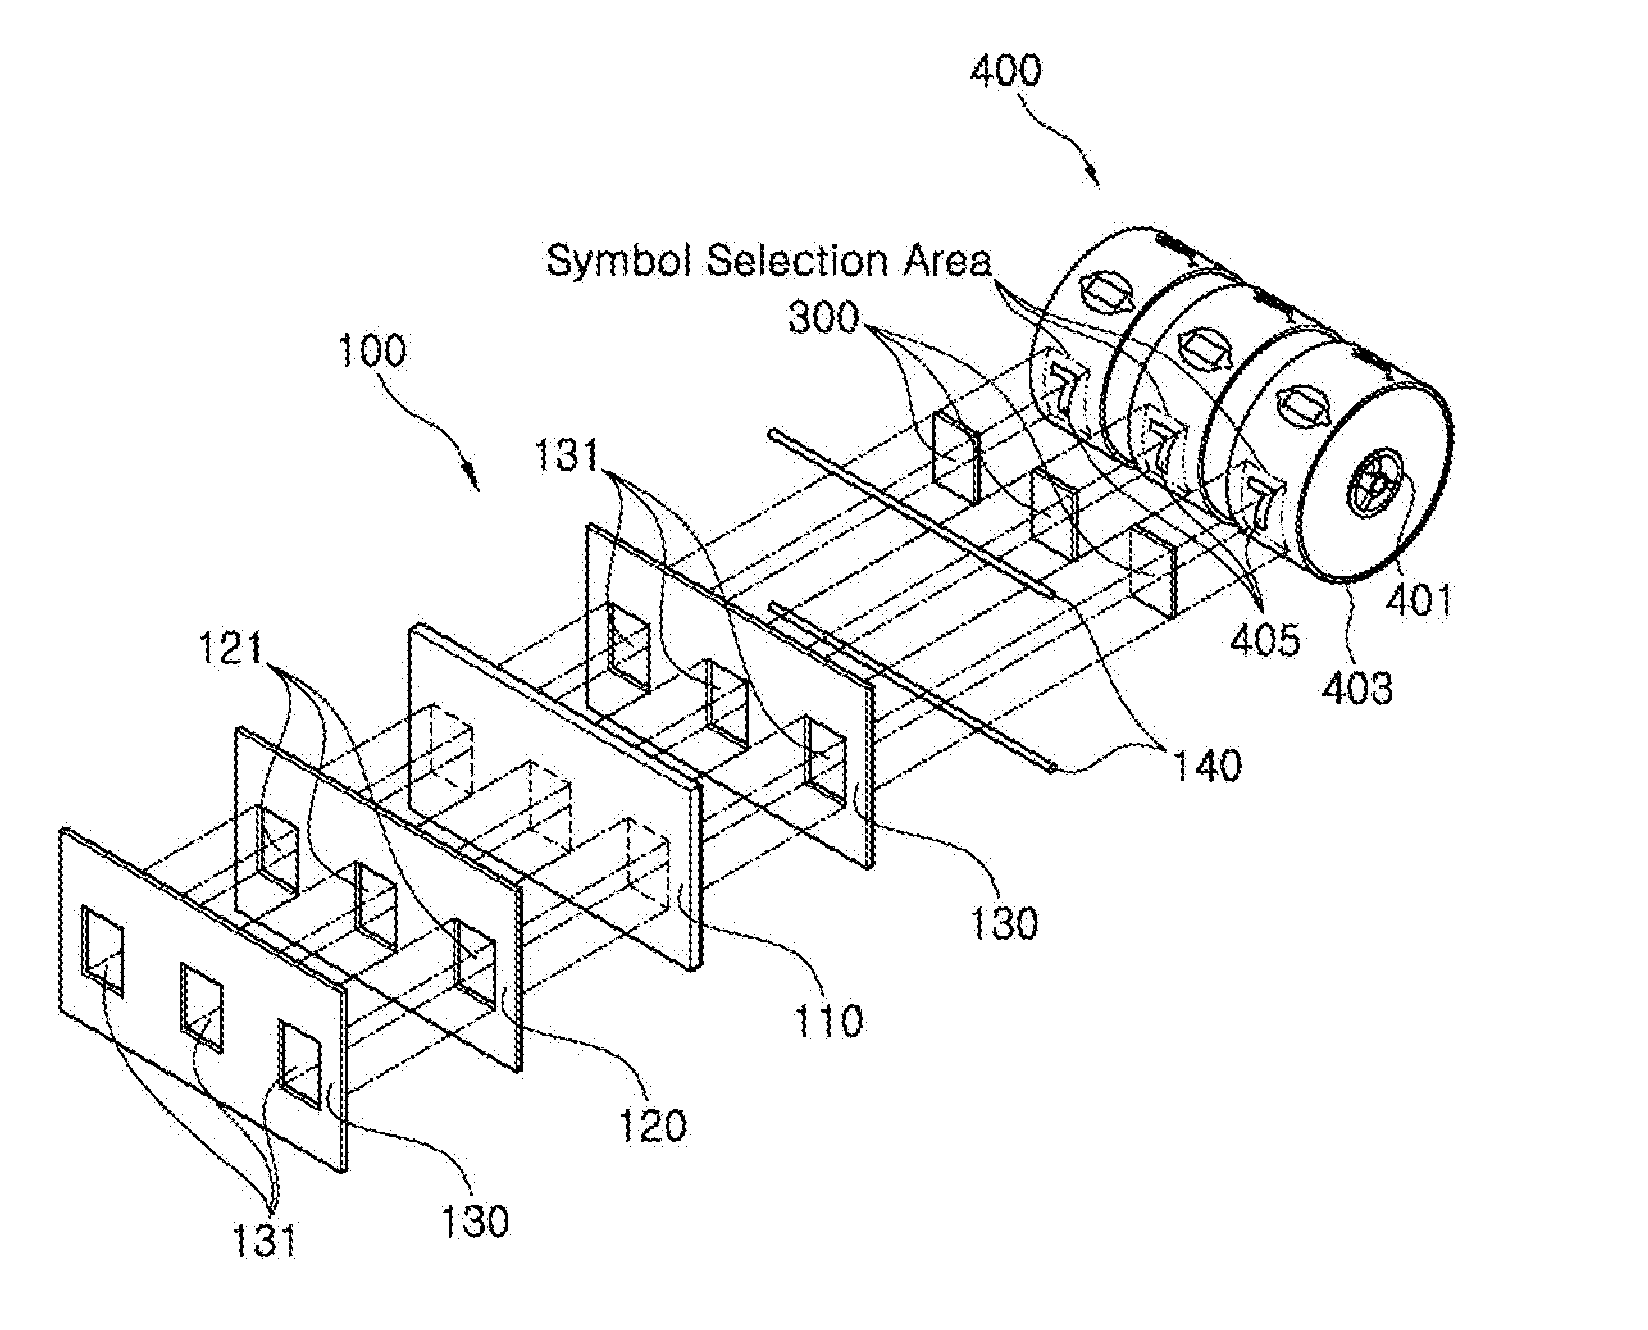 Display device, and game console including same